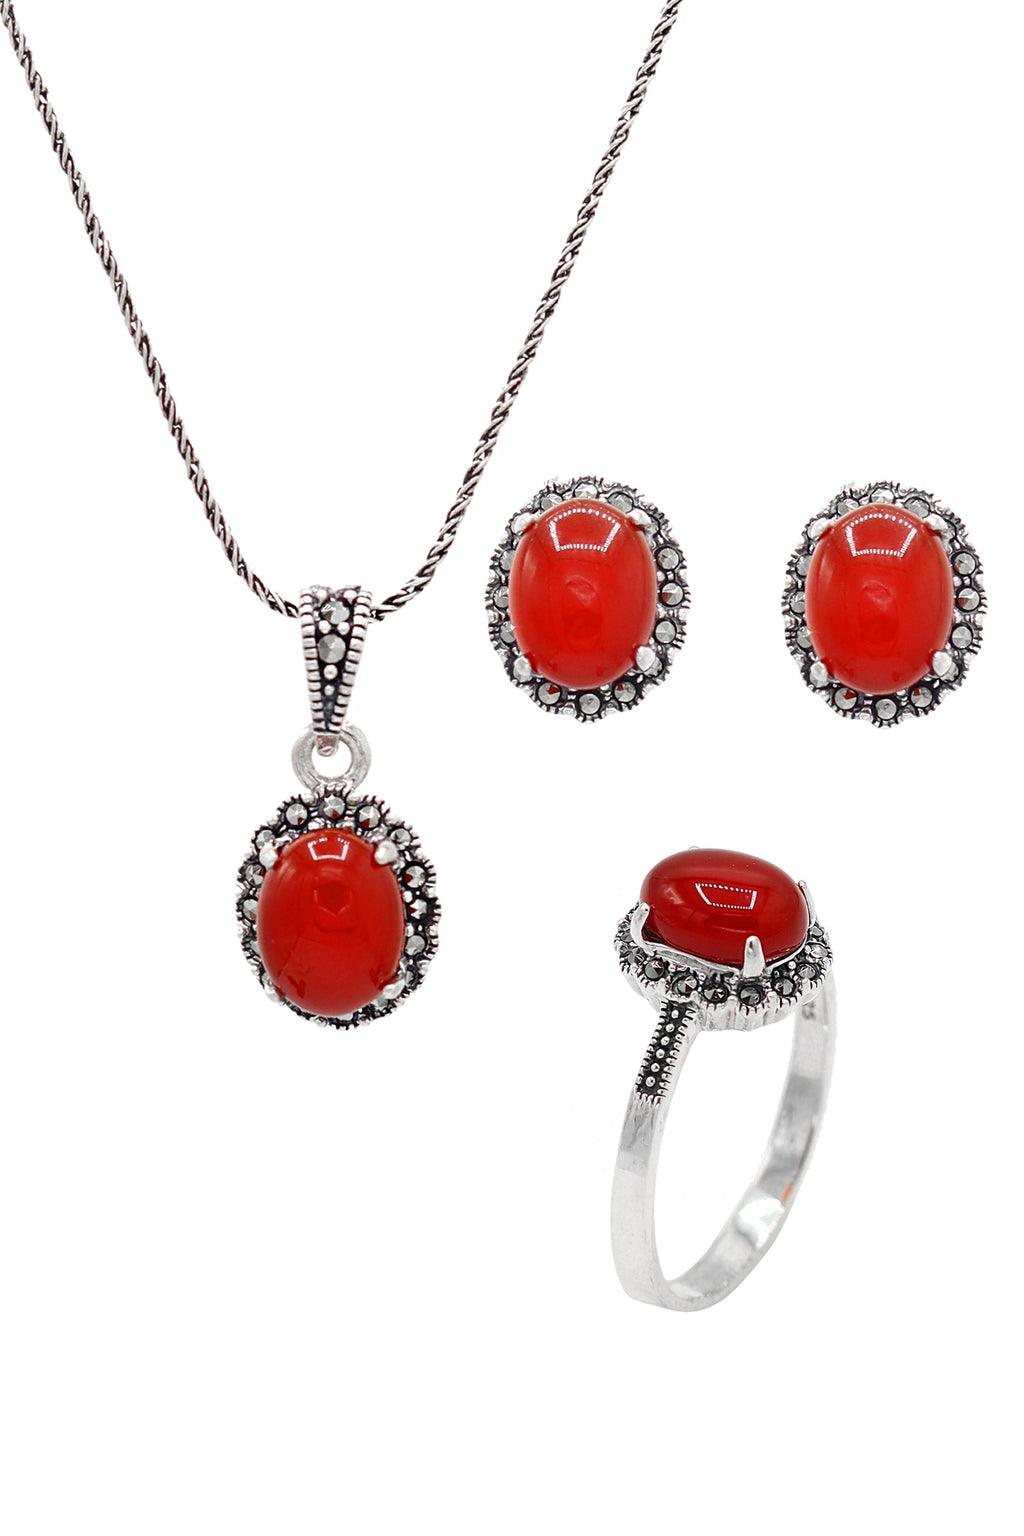 Oval Model Silver Triple Jewelry Set With Agate (NG201021935)